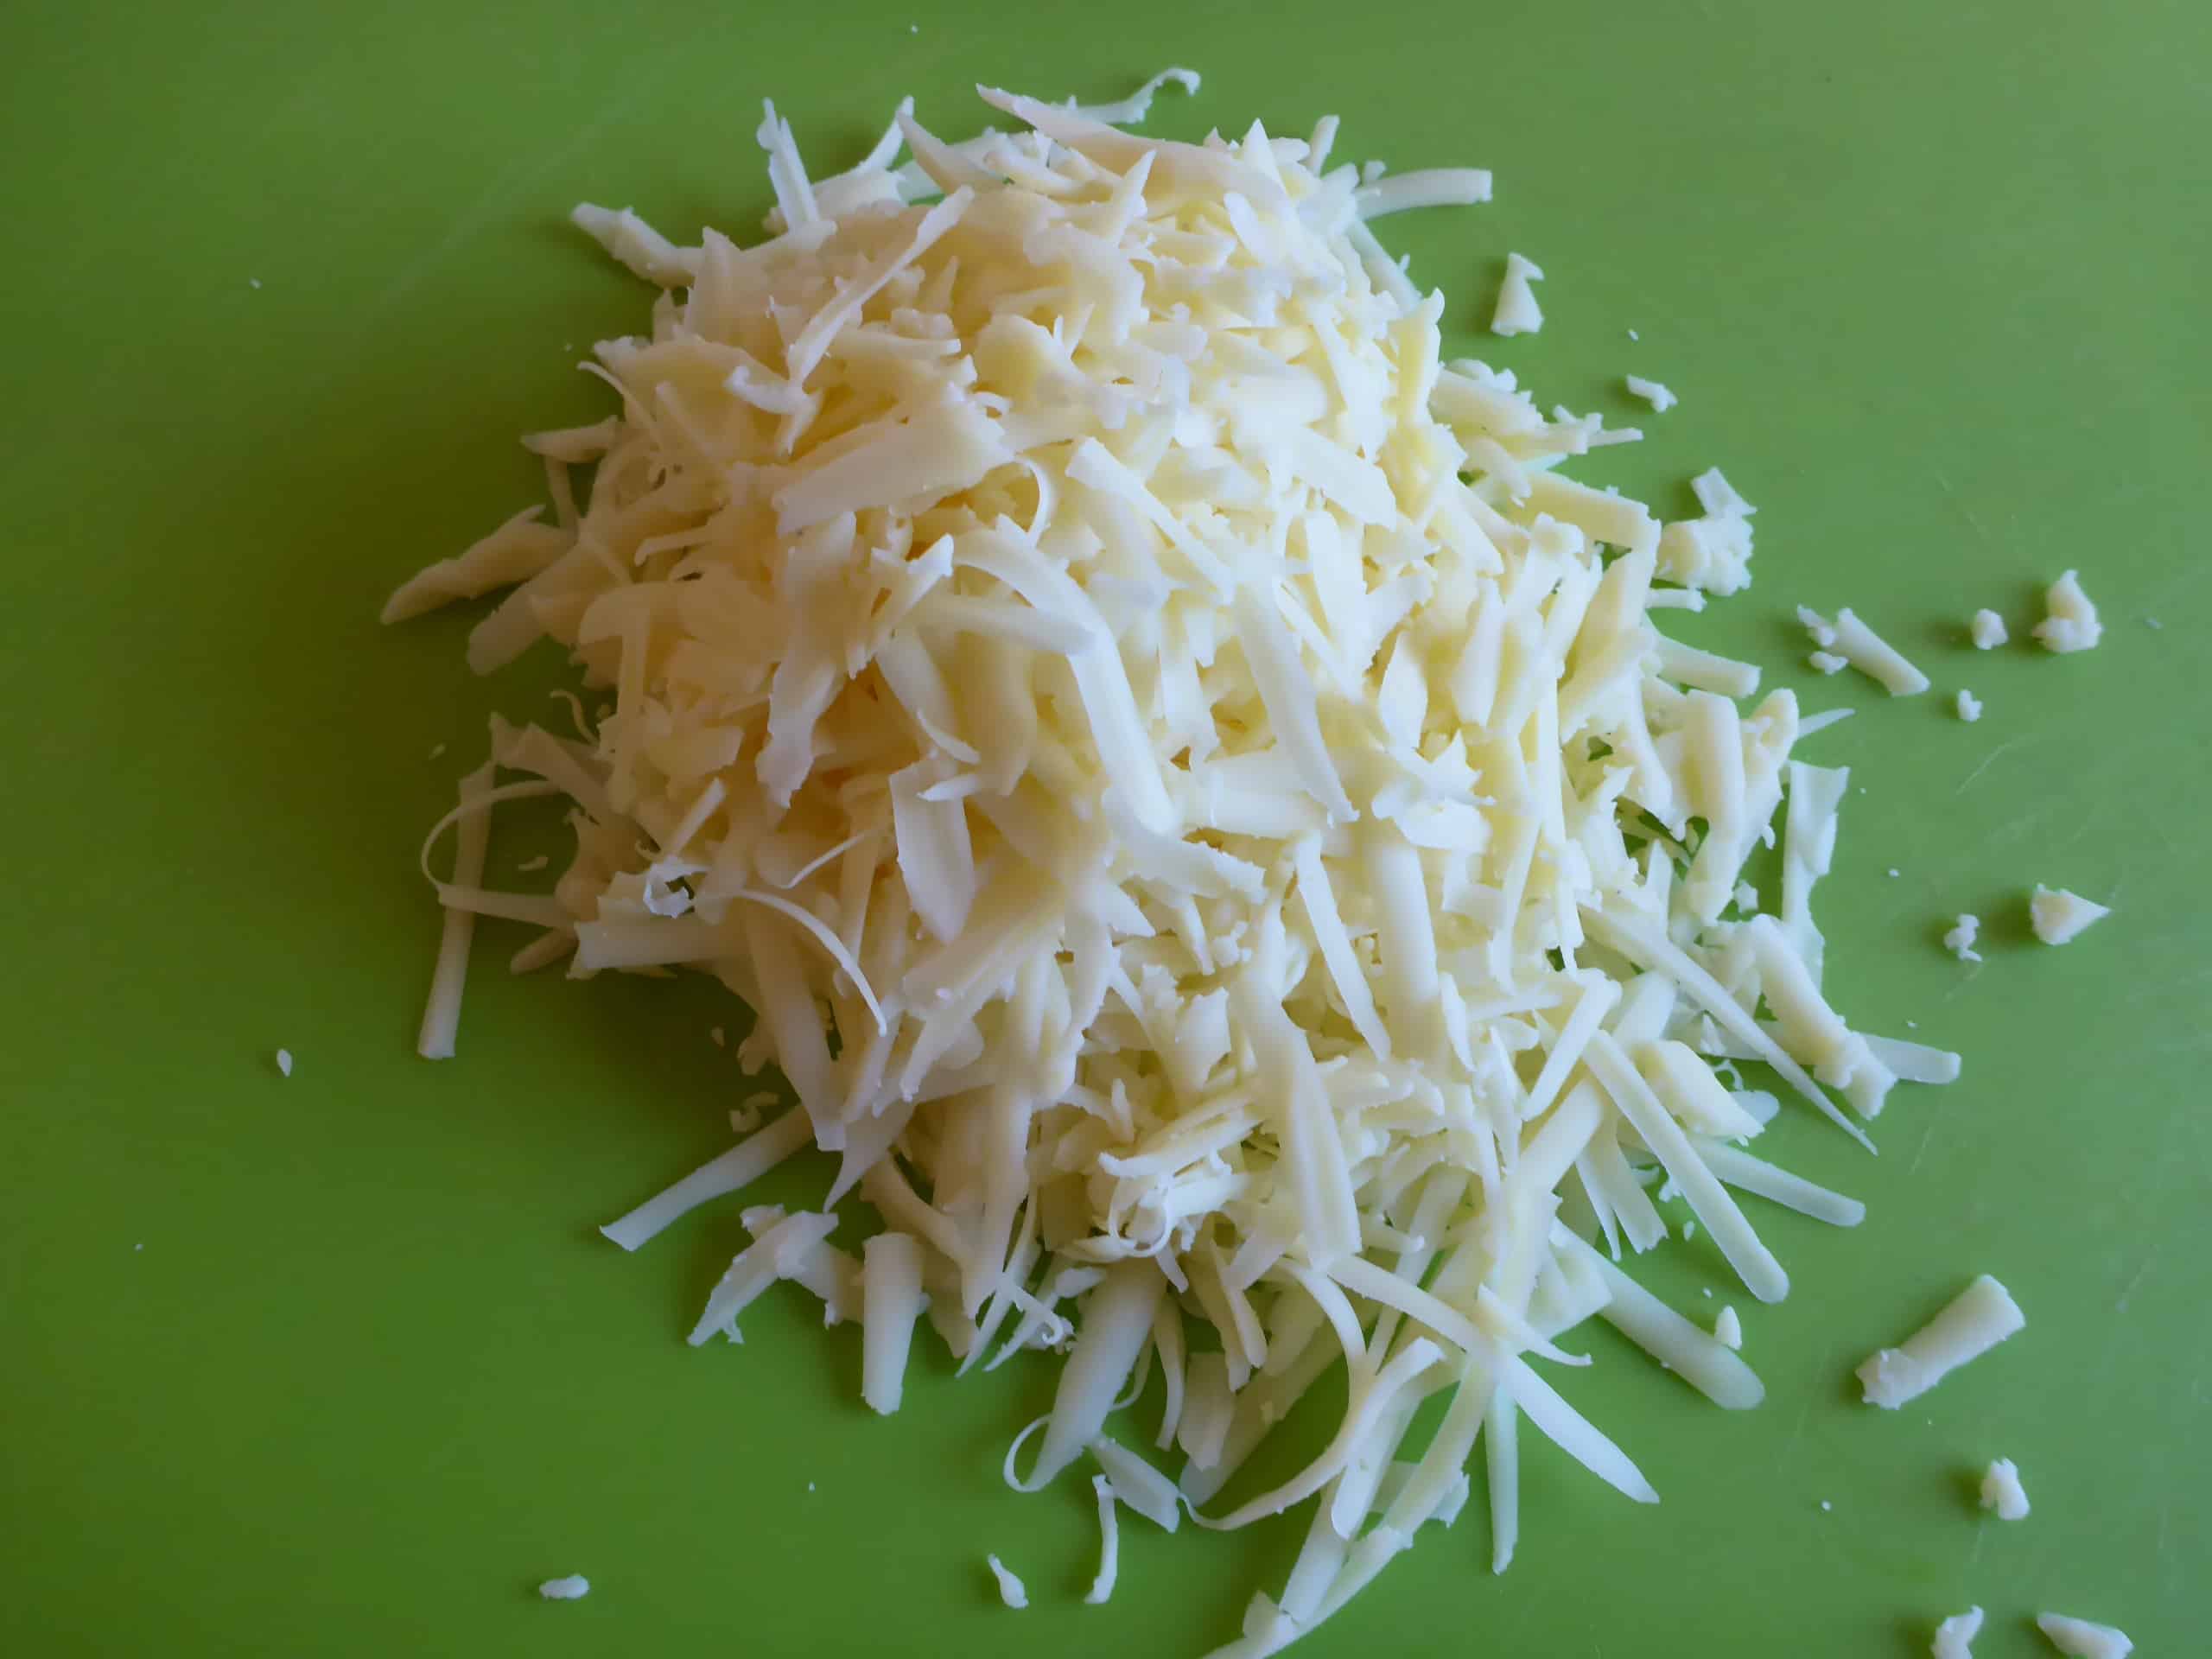 Freshly grated cheese on a cutting board.